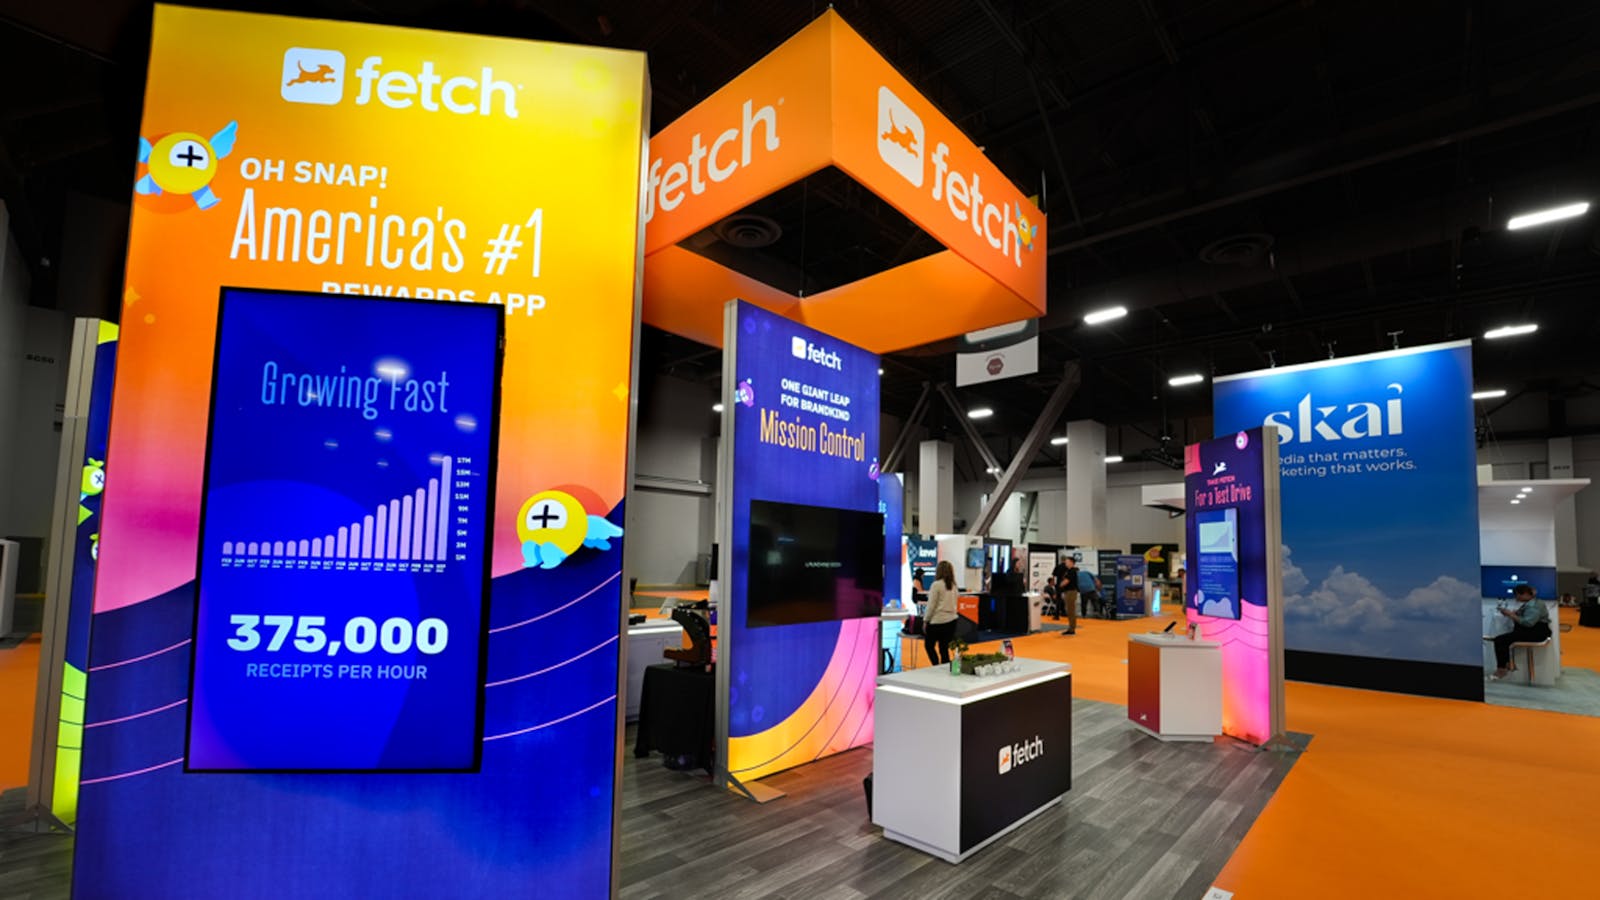 Fetch's booth at the Groceryshop 2022 Conference in Las Vegas. Photo by Fetch.